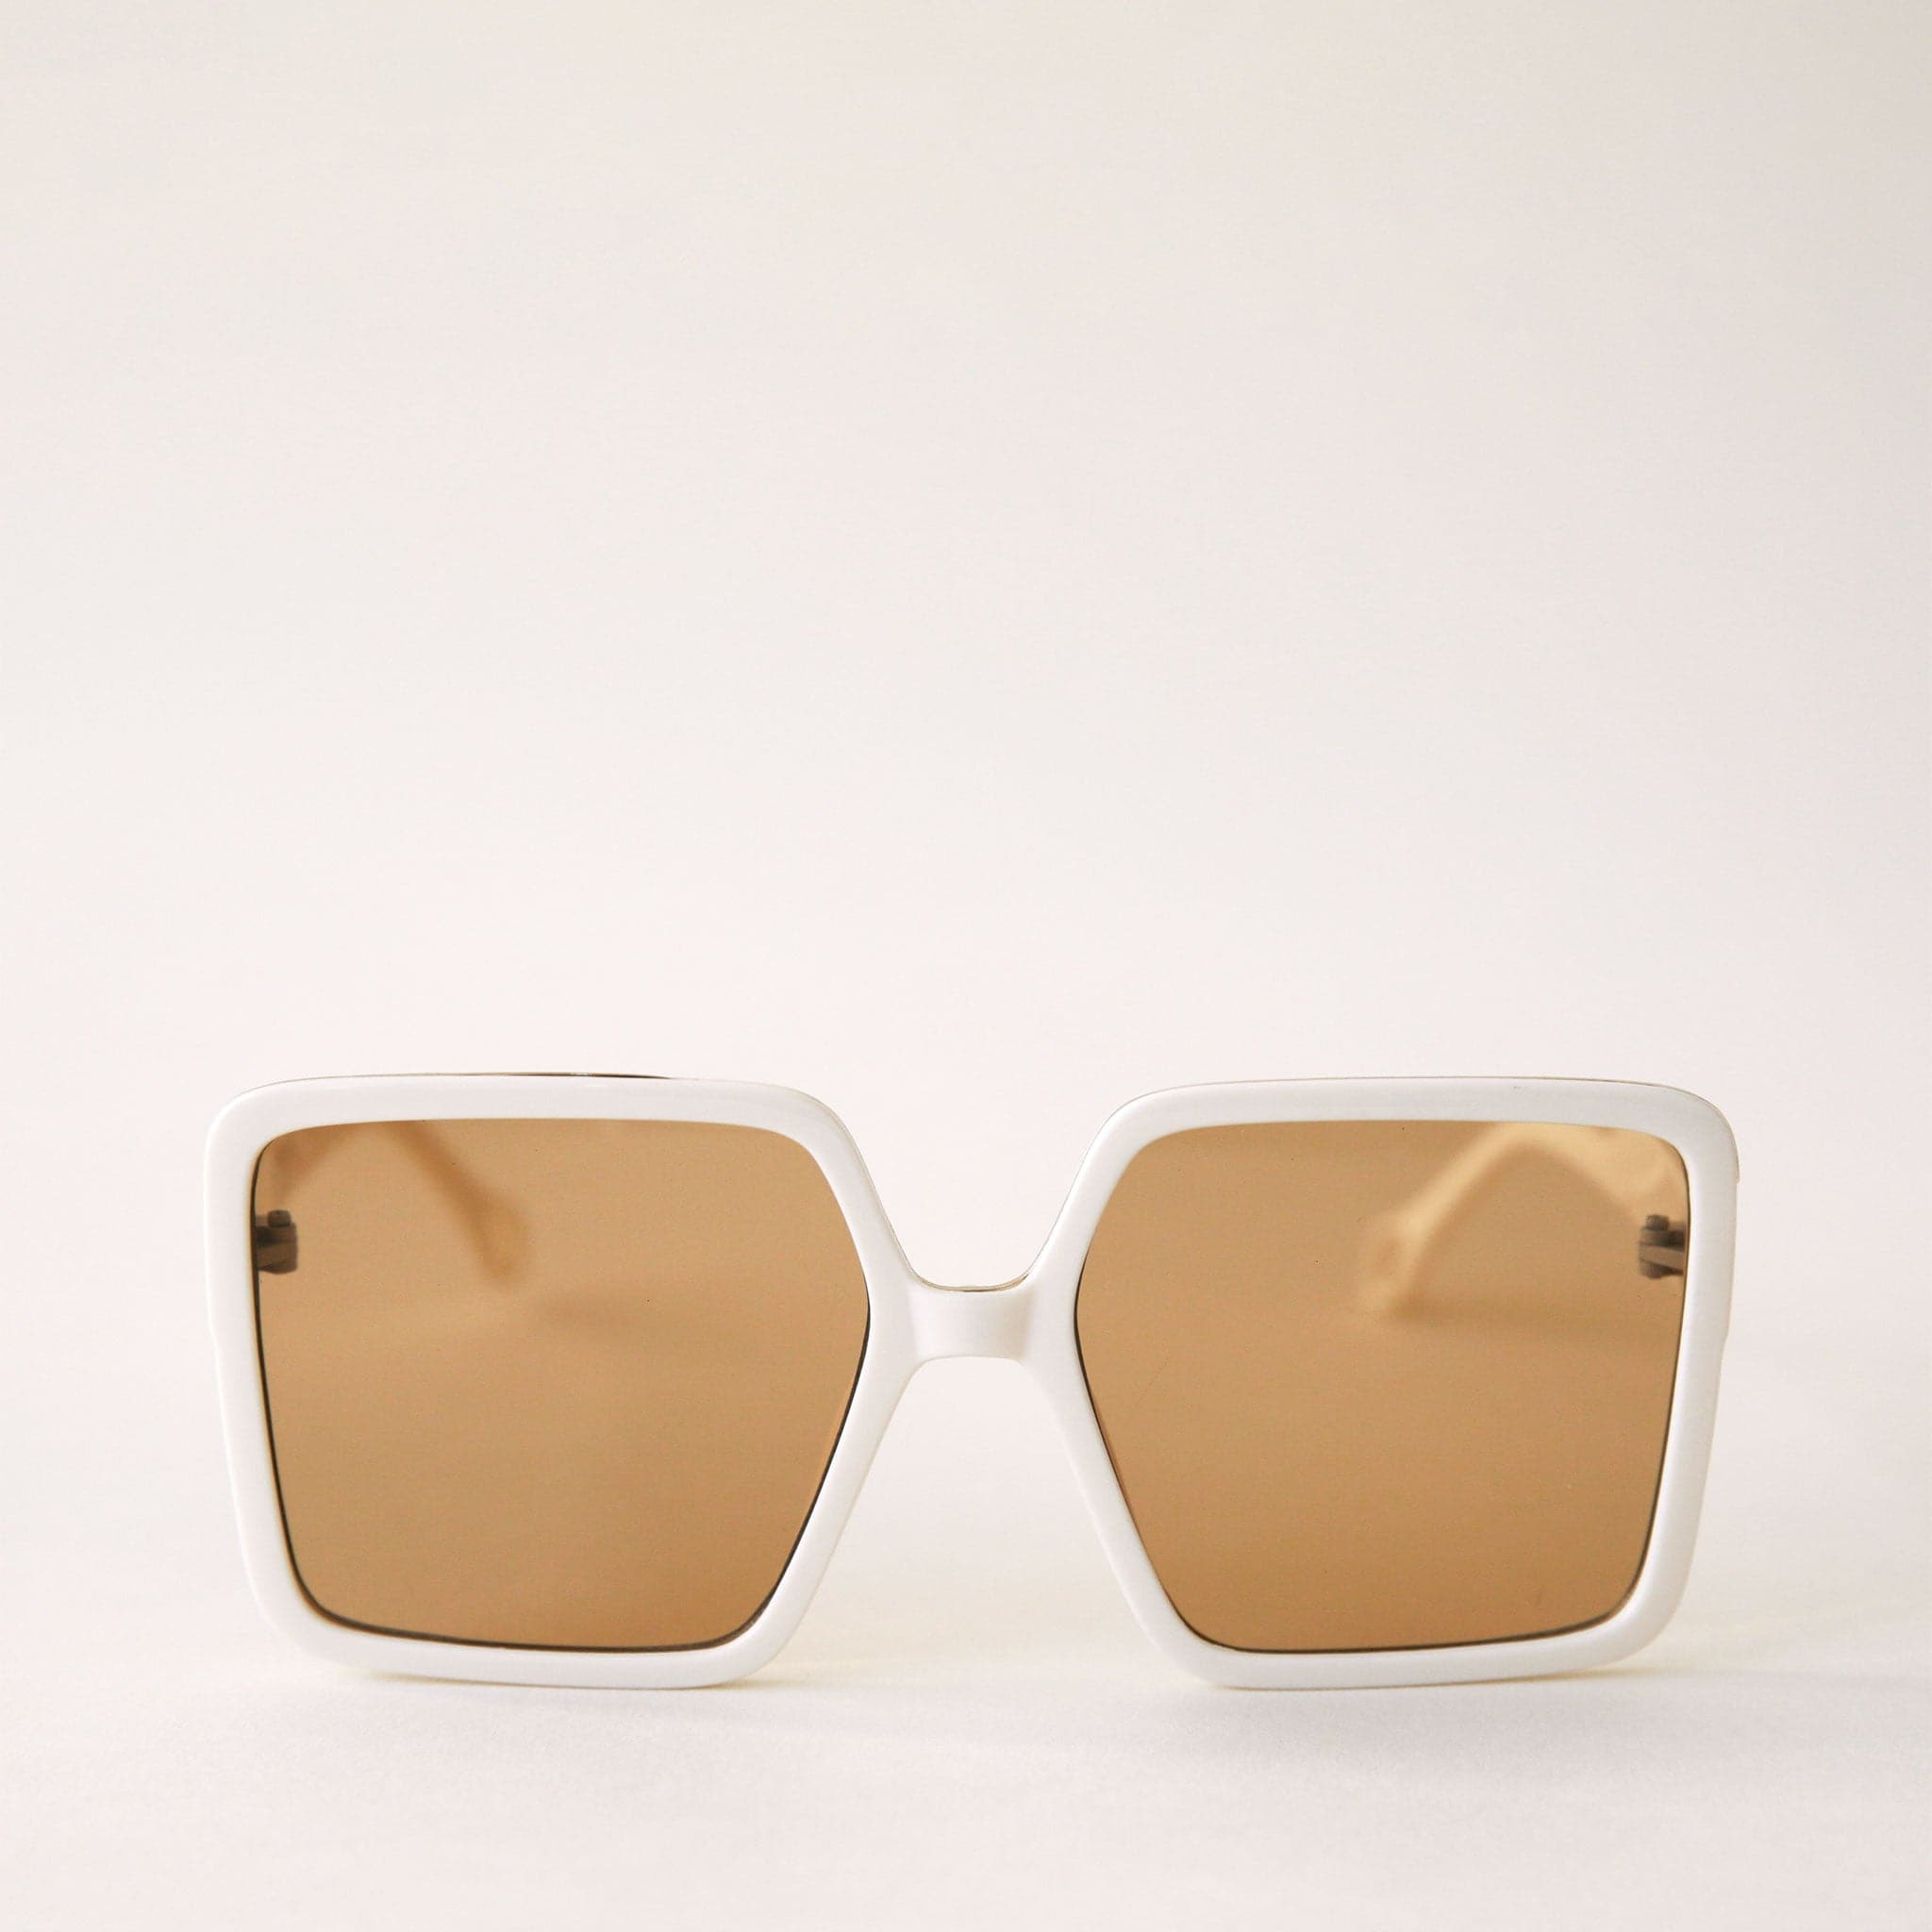 70&#39;s inspired square sunglasses with an oversized white frame and amber colored lenses.